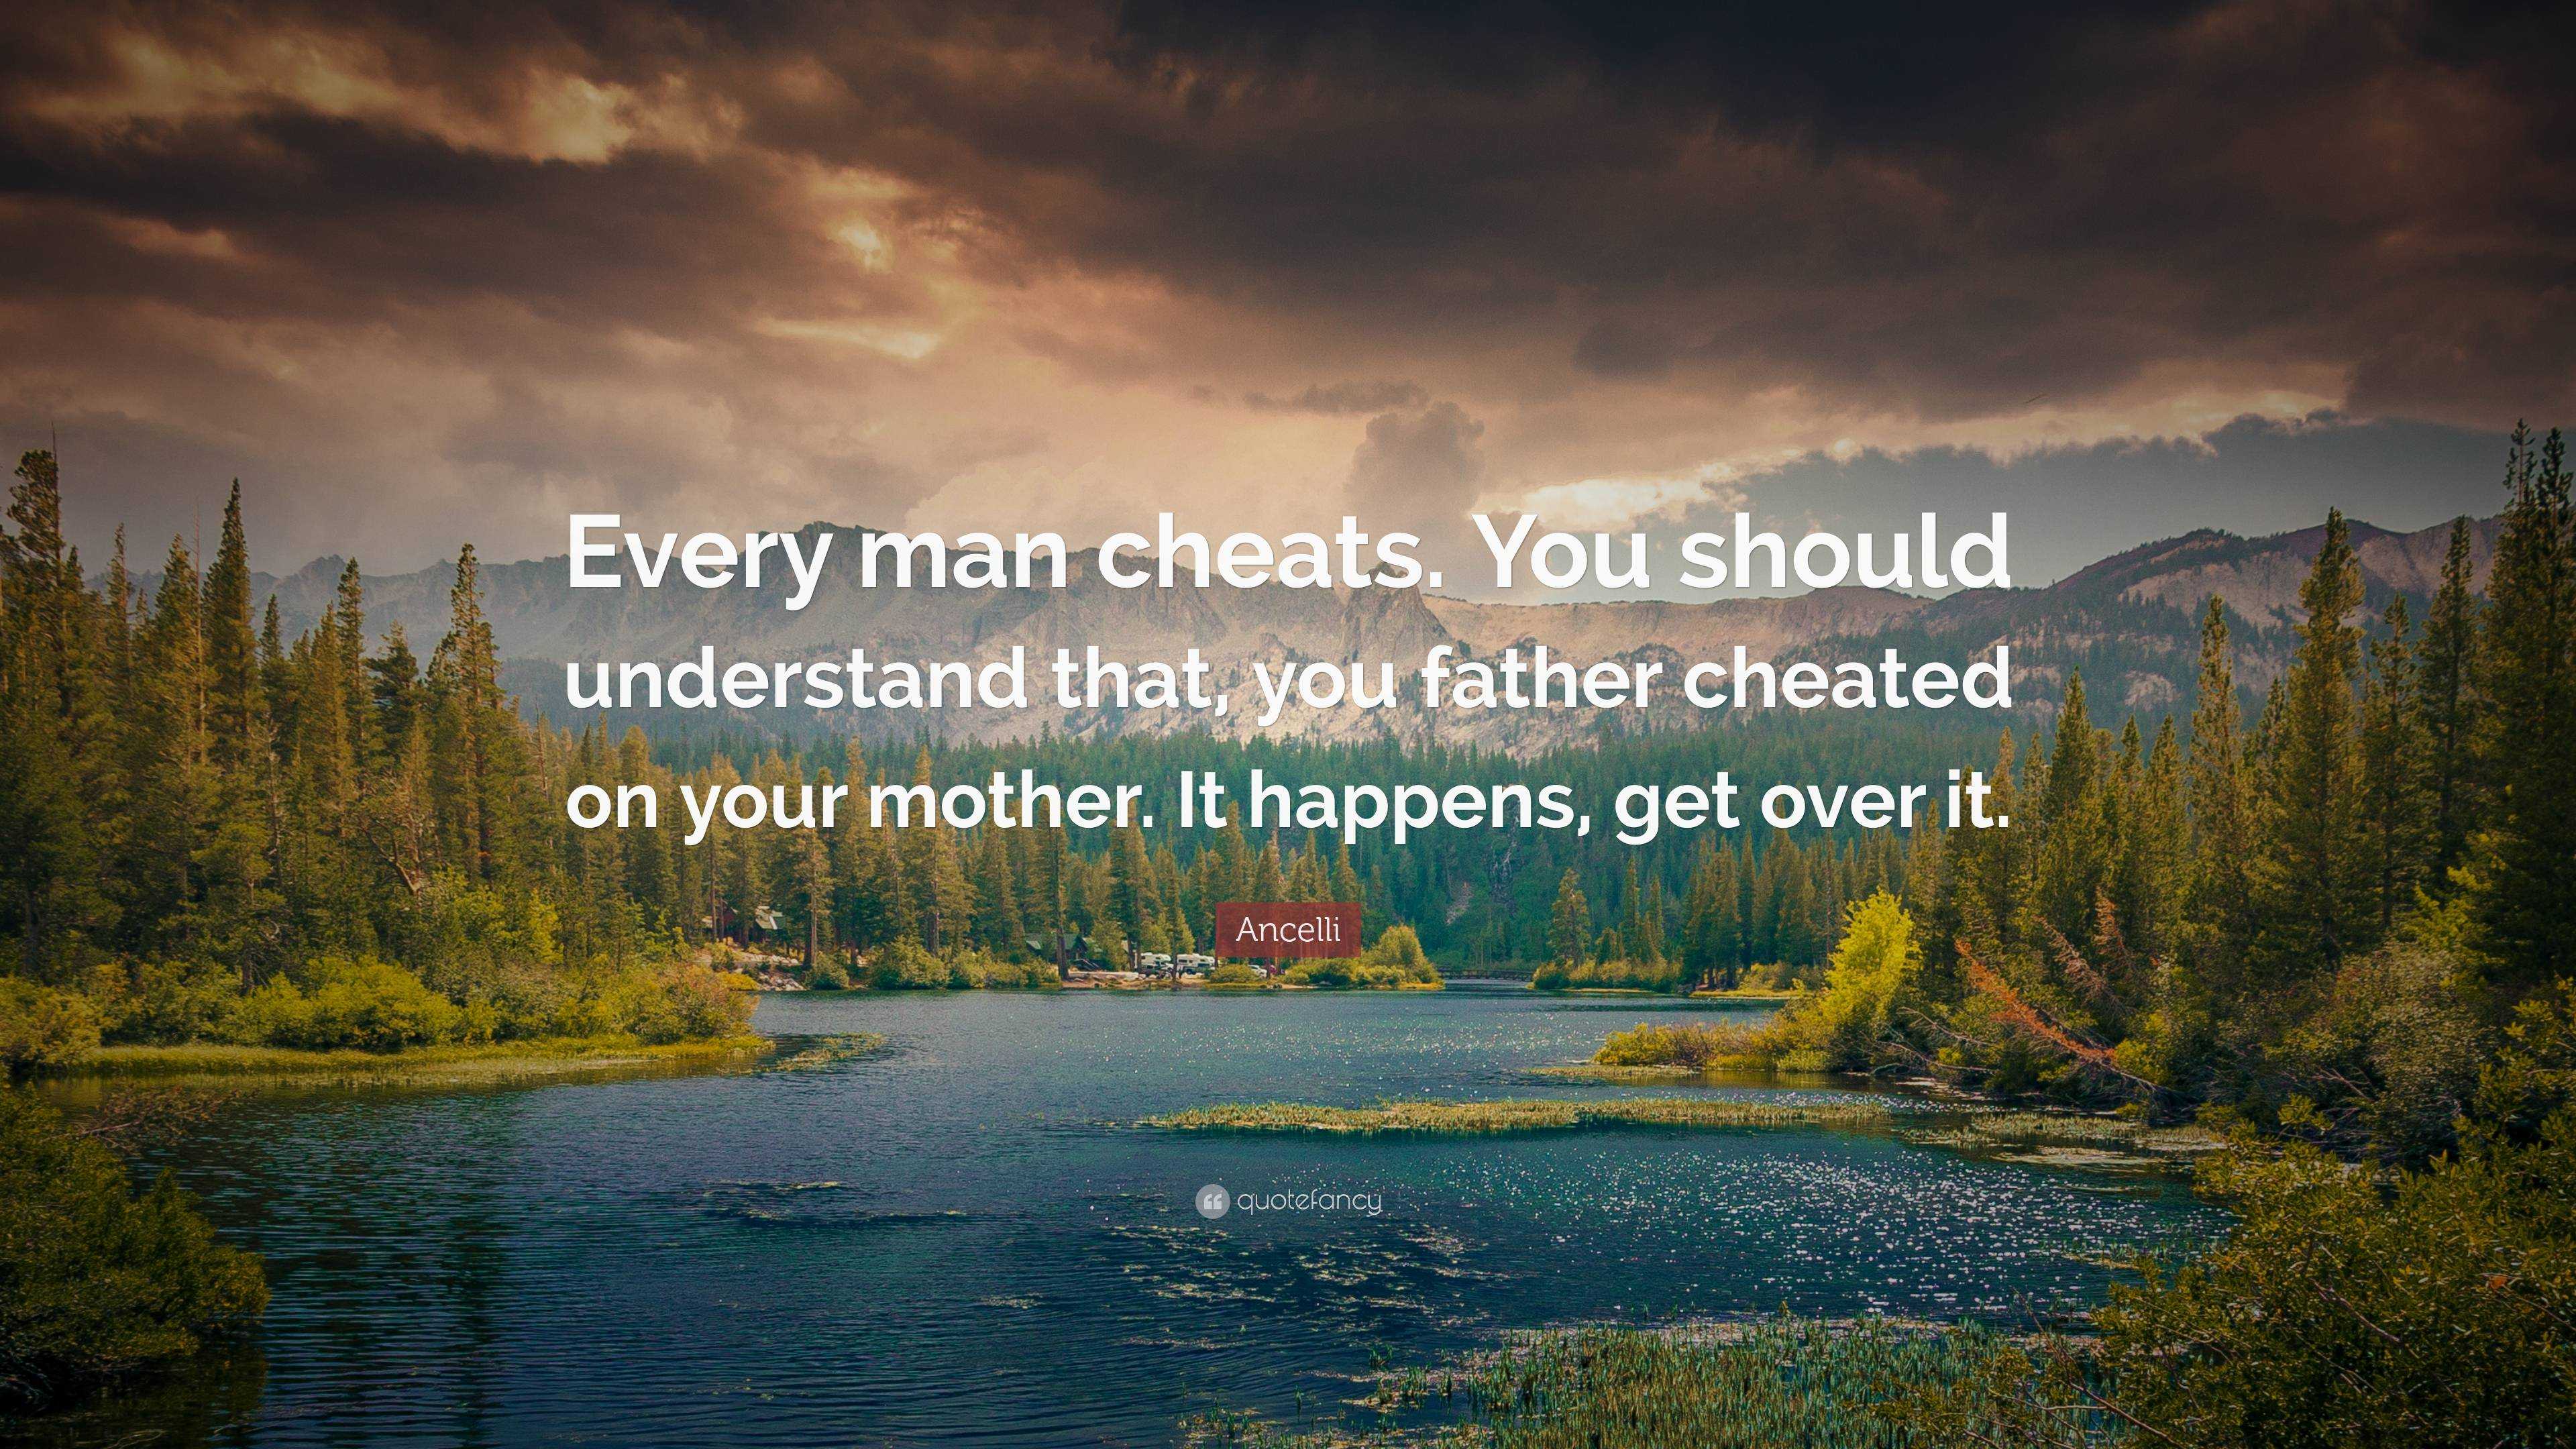 What to do when your father cheats on your mother